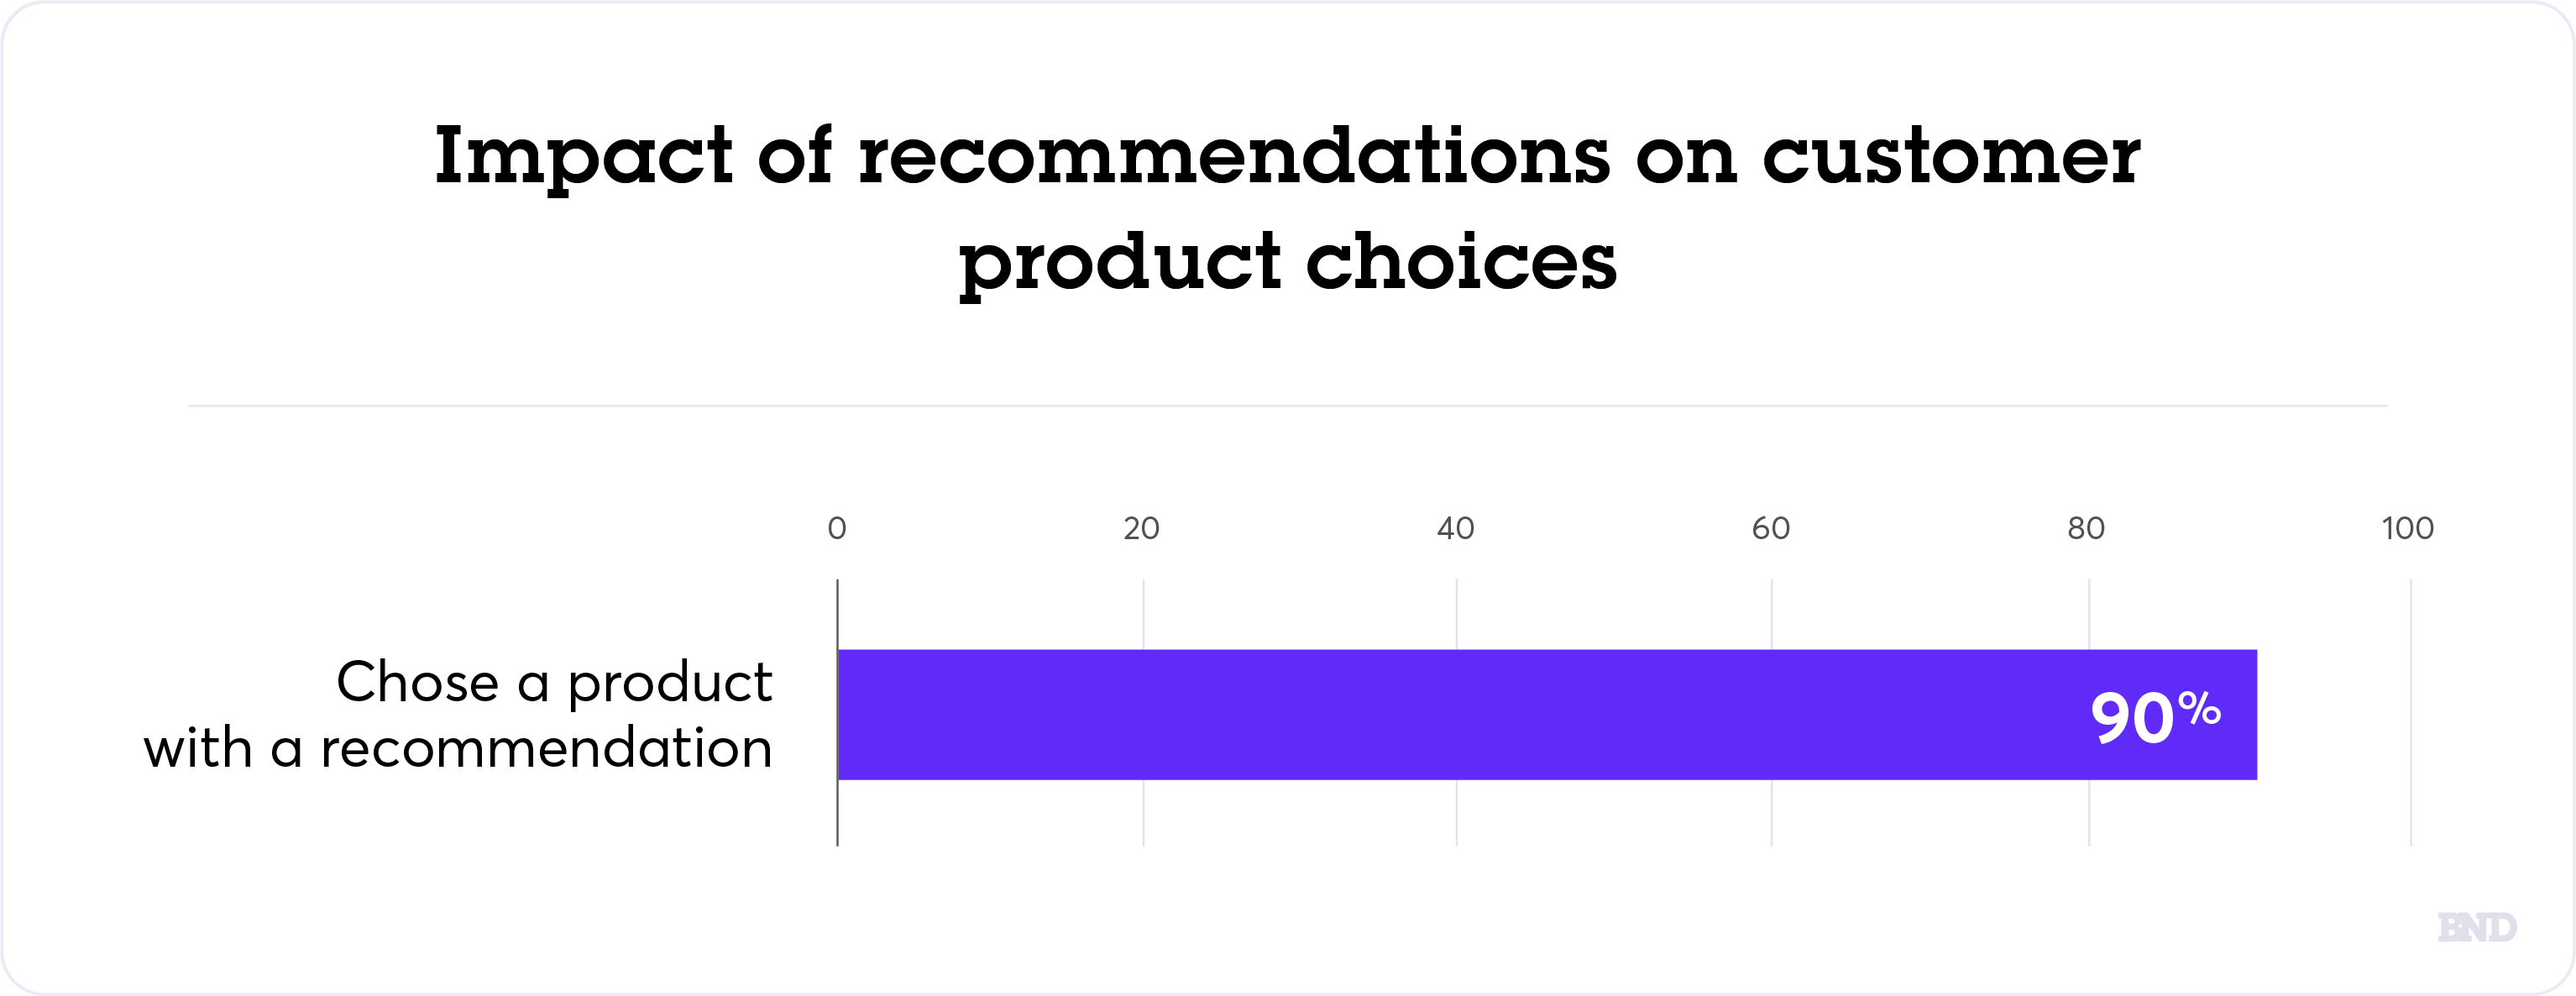 Impact of recommendations on product choices graph